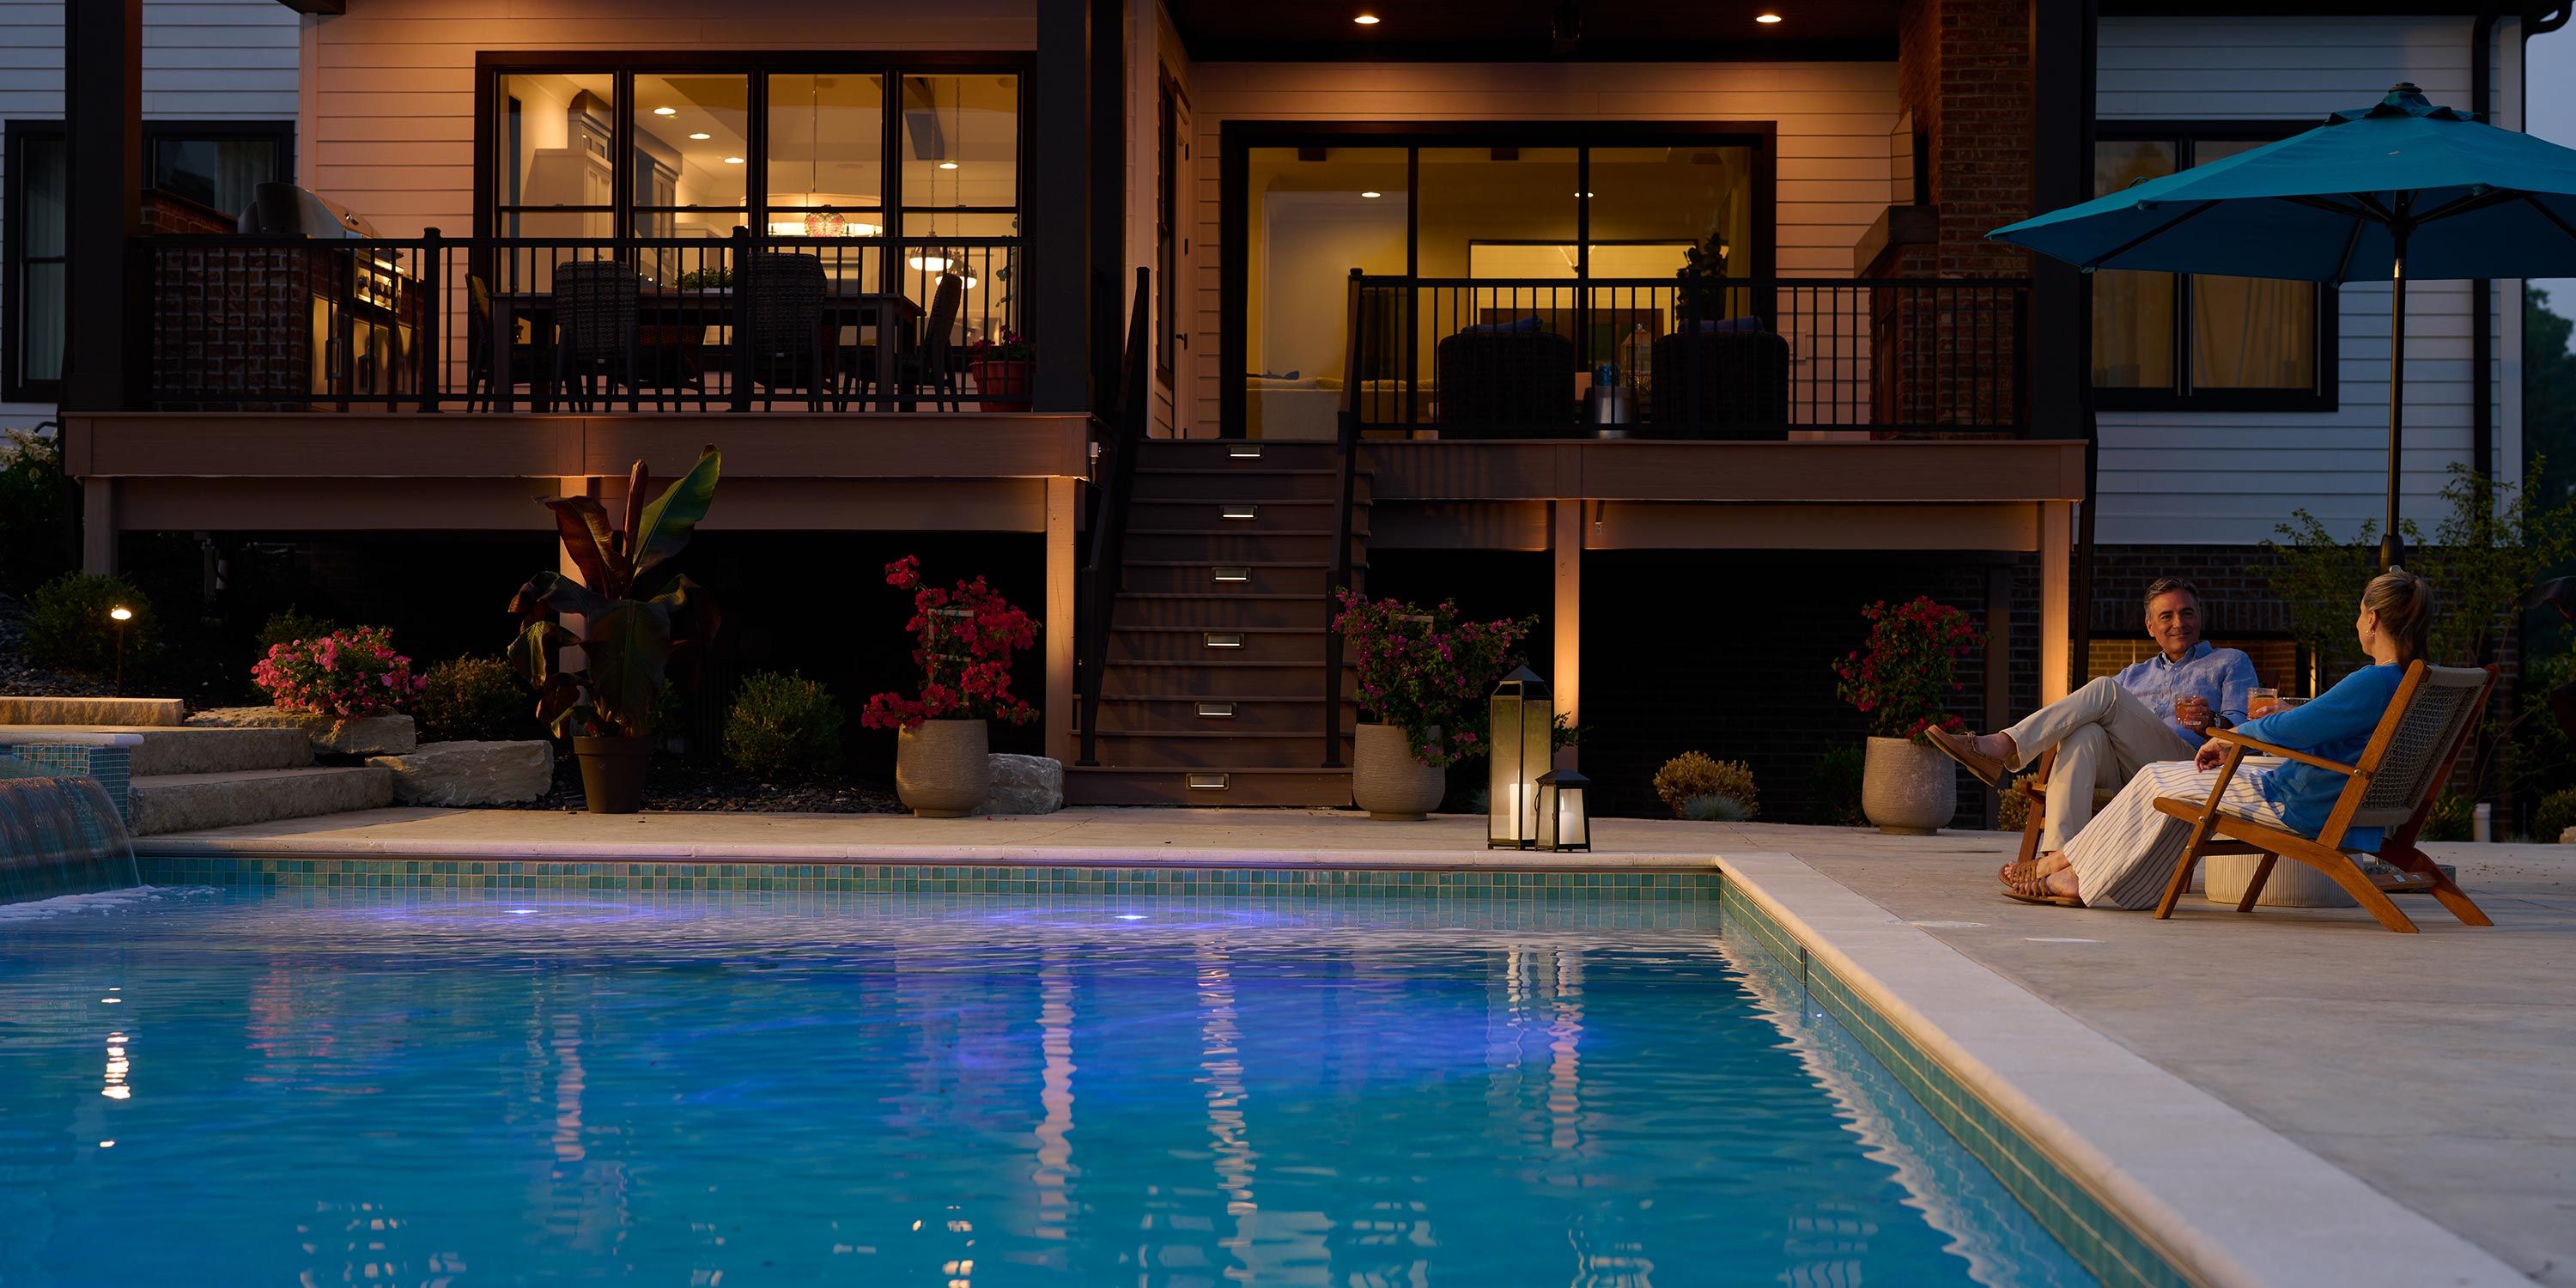 Evening view of a backyard pool area with a seating area, illuminated pool, and a couple relaxing by the poolside.